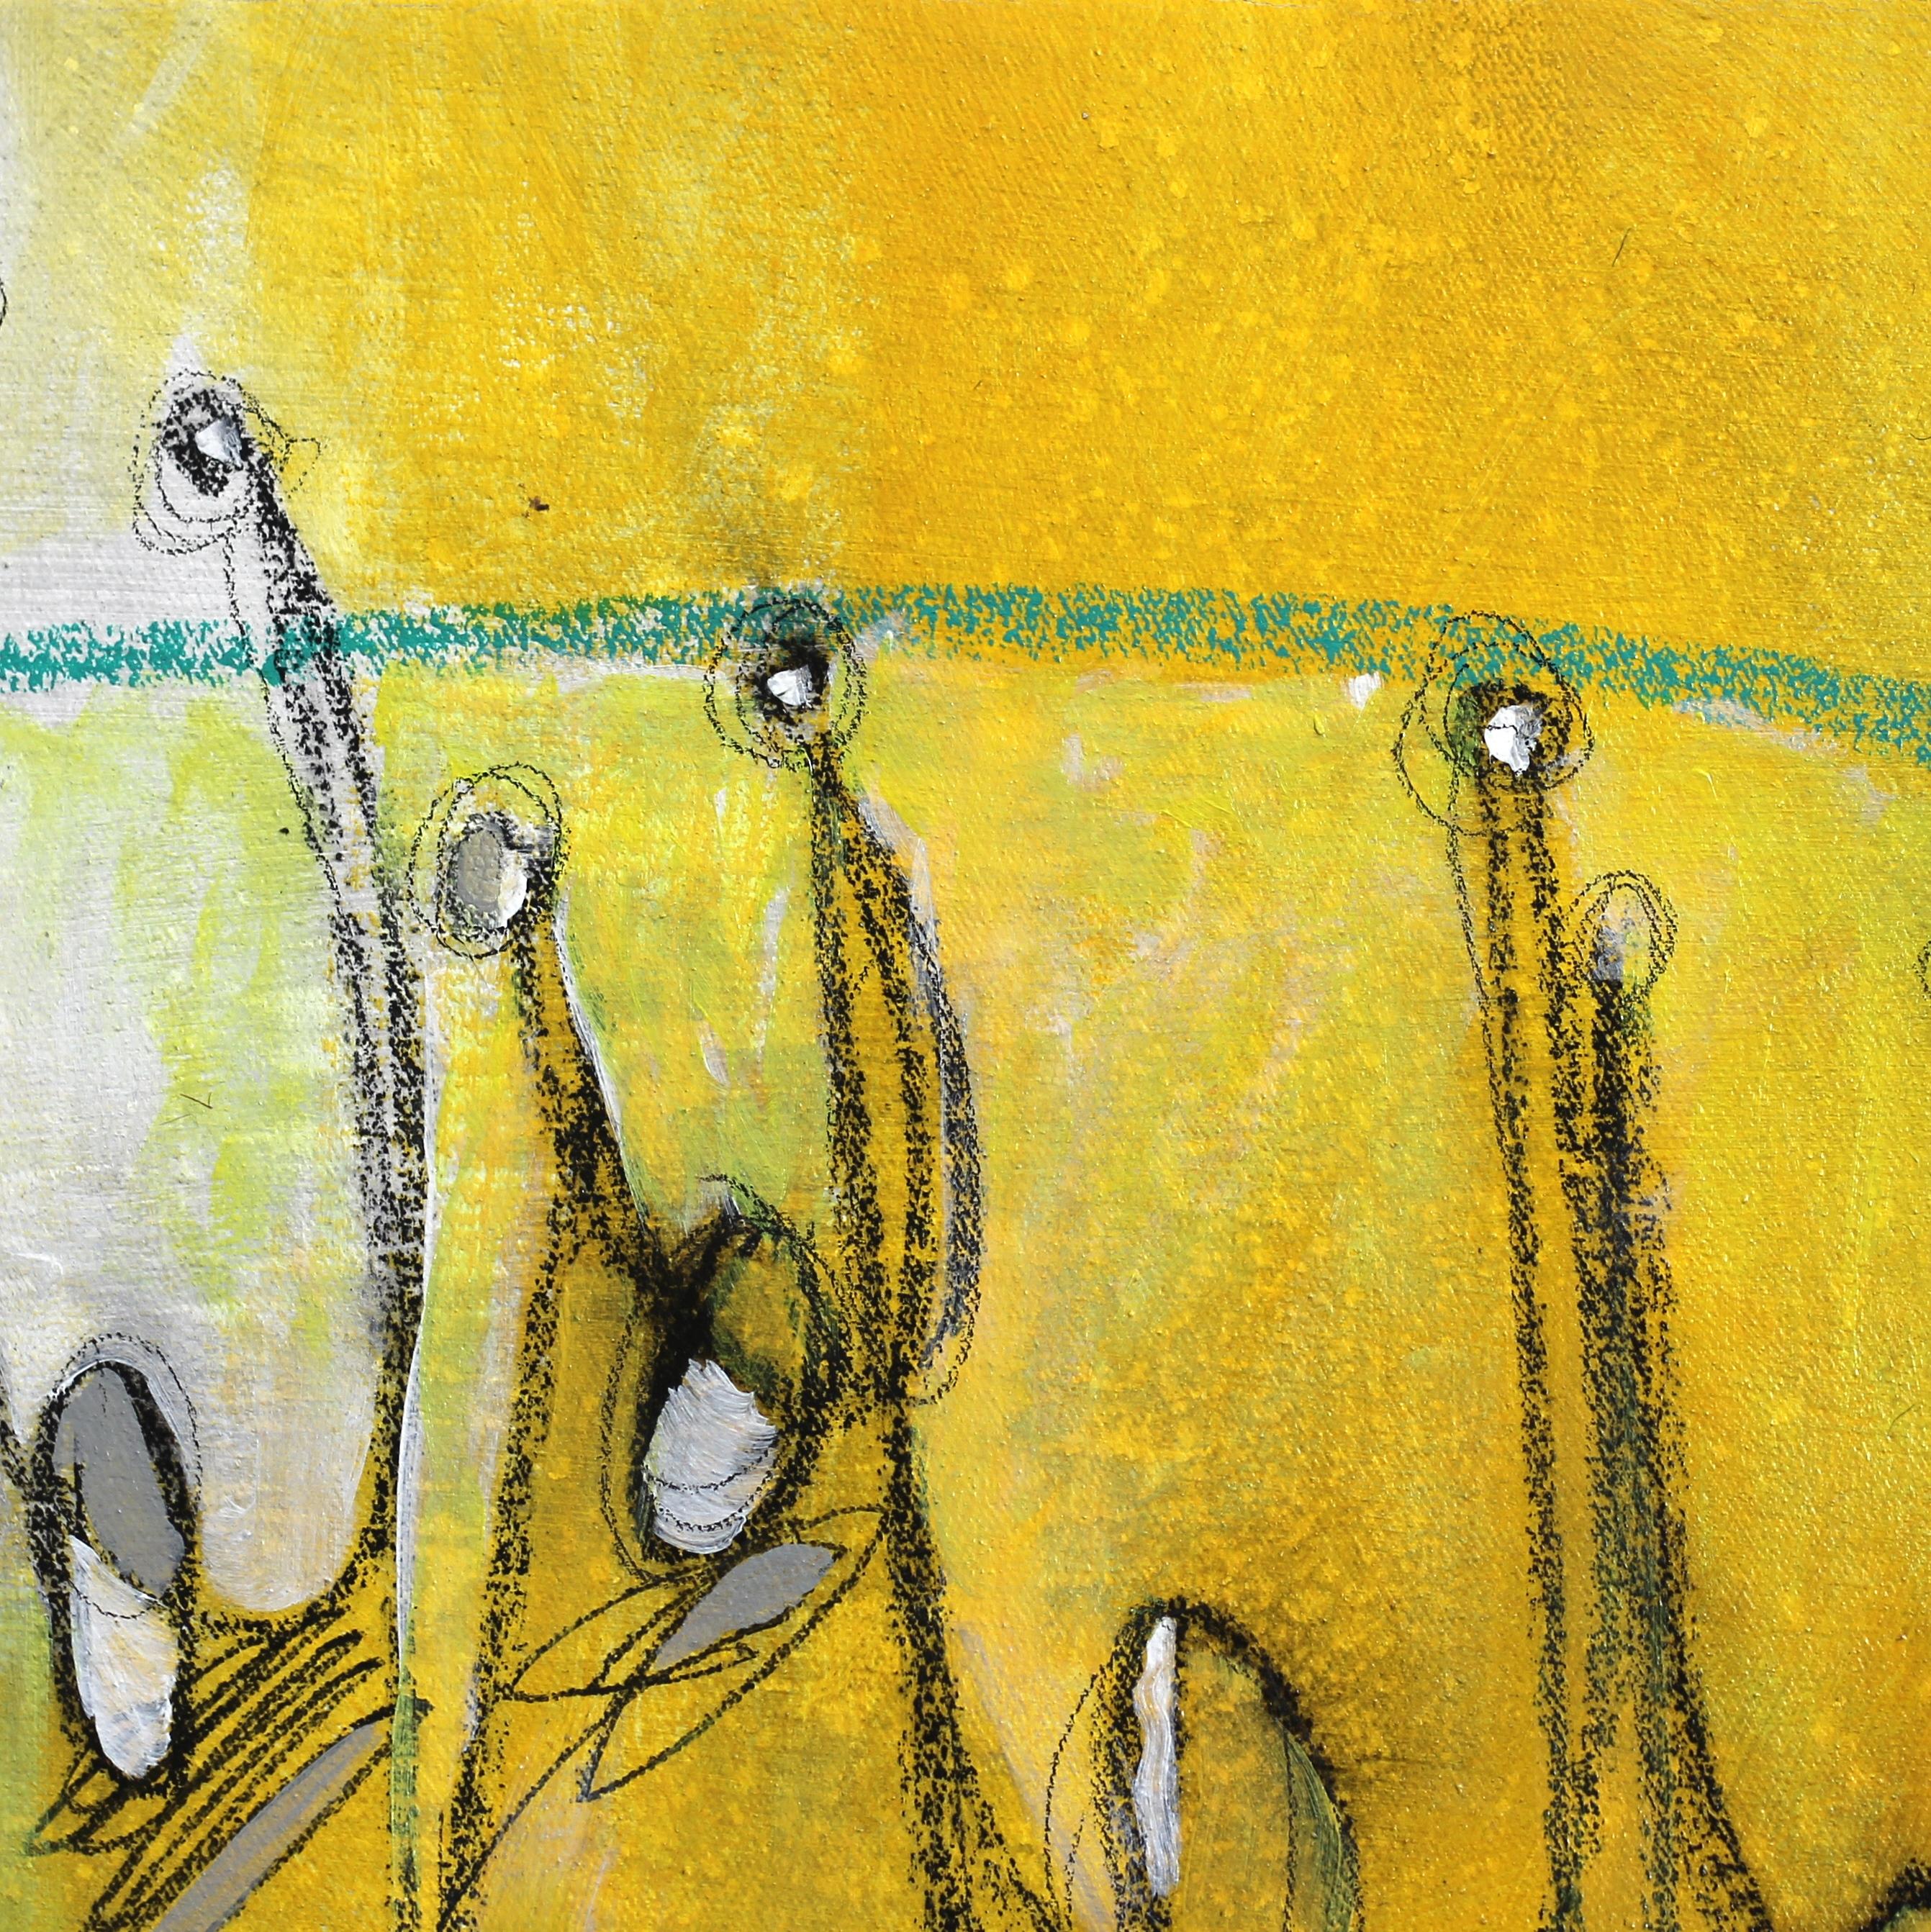 Sunshine Crowd - Original Yellow Watercolor and Ink Artwork on Paper - Beige Abstract Painting by Sergio Valenzuela